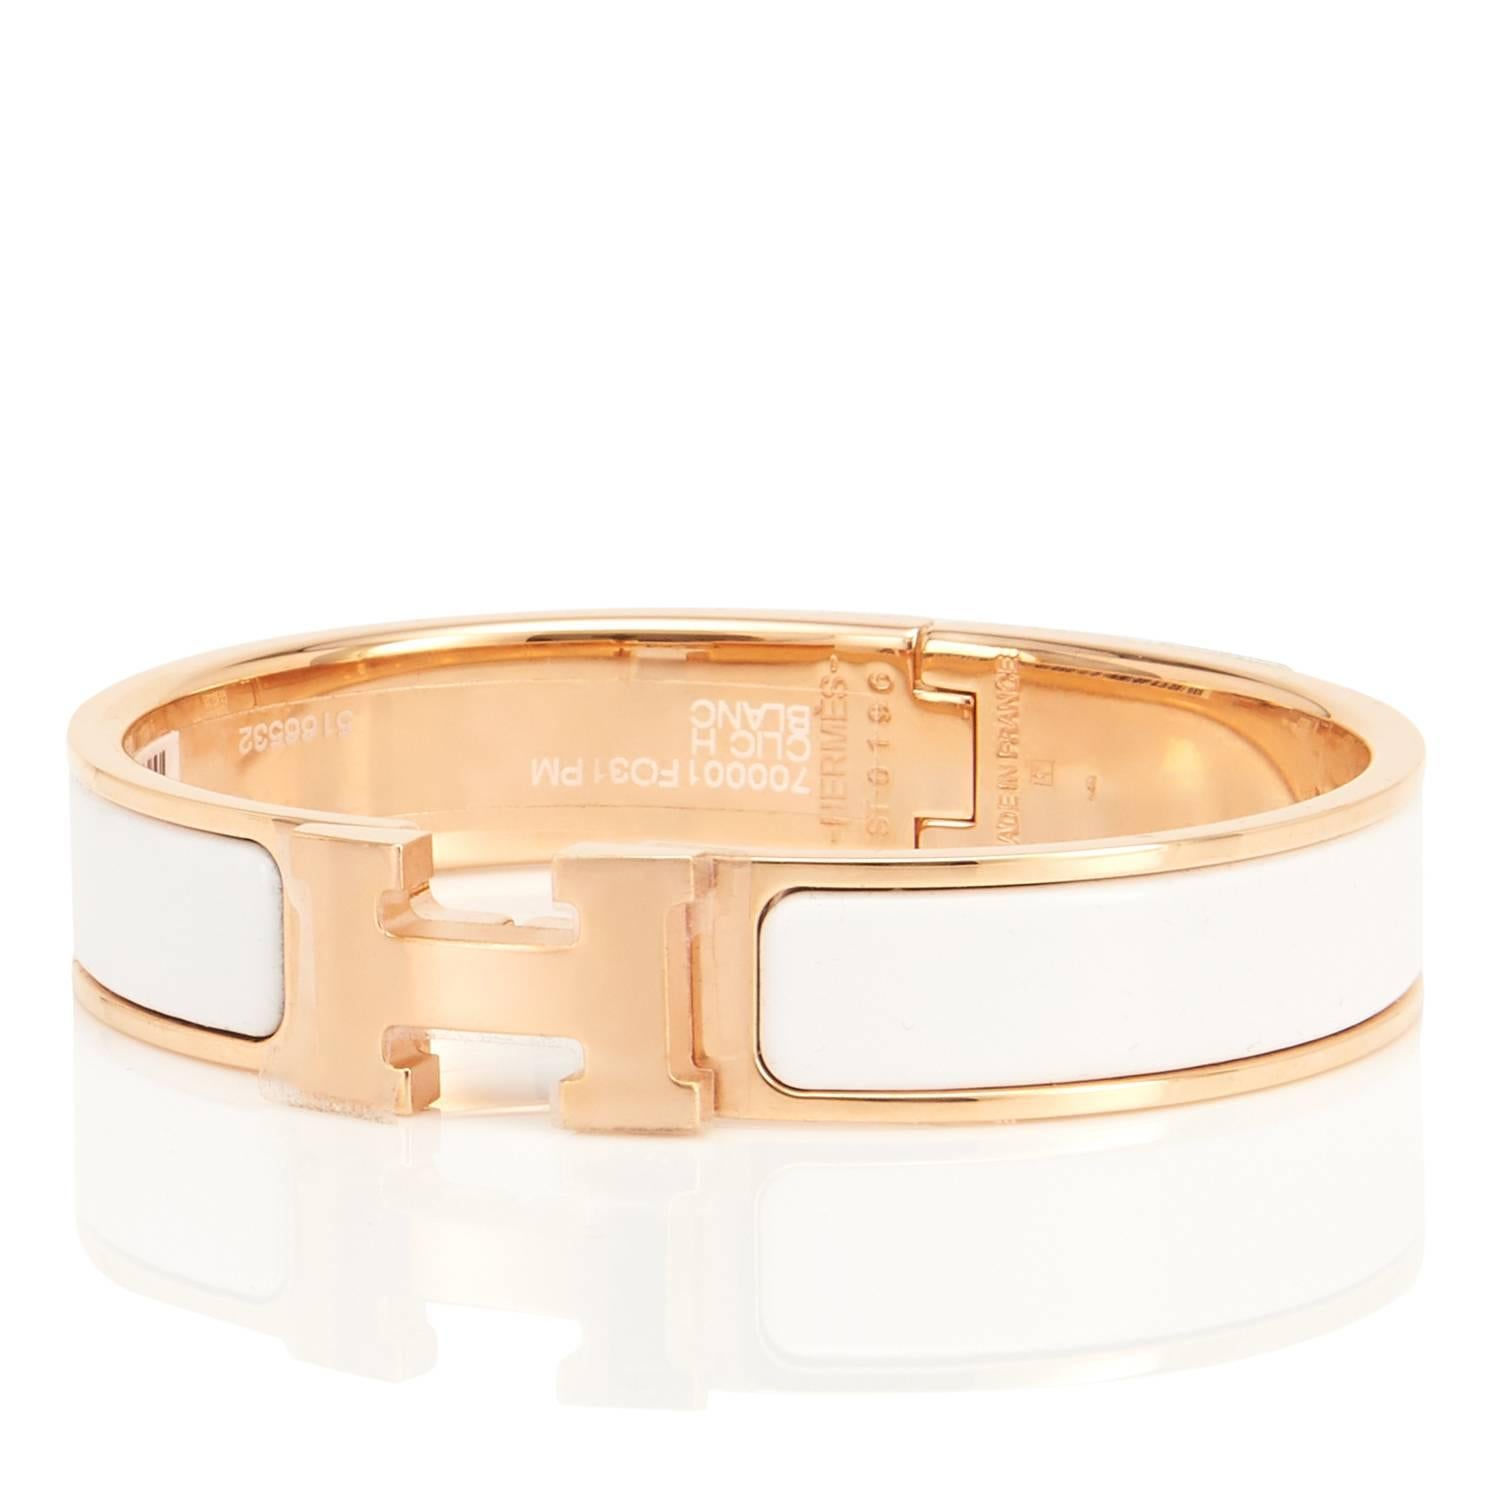 Hermes White Clic Clac H Rose Gold Enamel Bangle Narrow Bracelet PM
Brand New in Box; Store fresh with Hermes velvet pouch and box.
The most popular summer bracelet and sold out in most Hermes stores.
Narrow model. Size PM. Gold plated